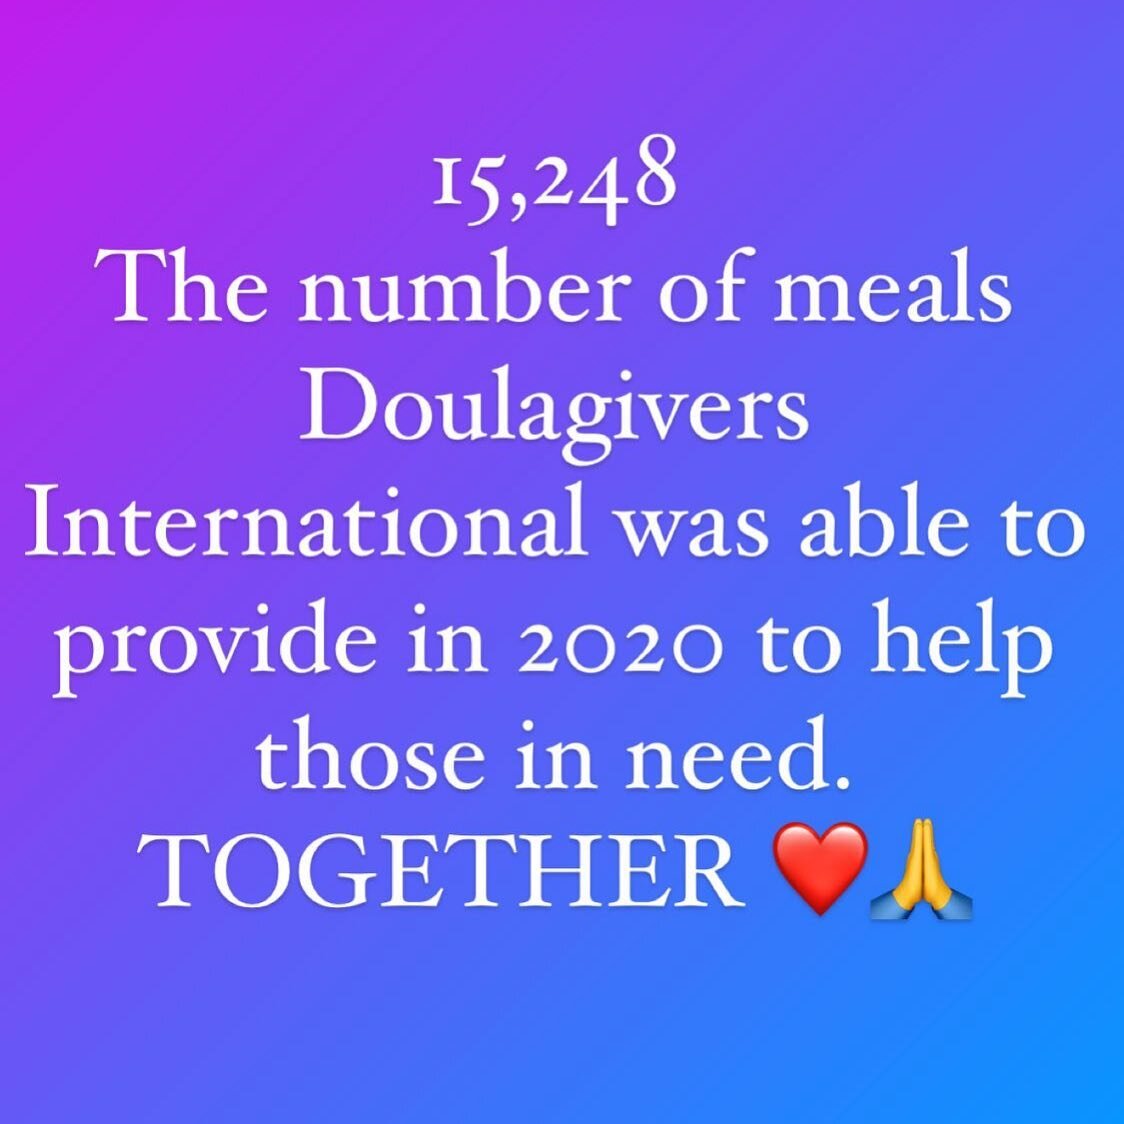 Thank you to all our Doulagivers students and staff for making this happen!! 🙏

I am so very grateful. ☀️

xoxoxo Suzanne 💜😘